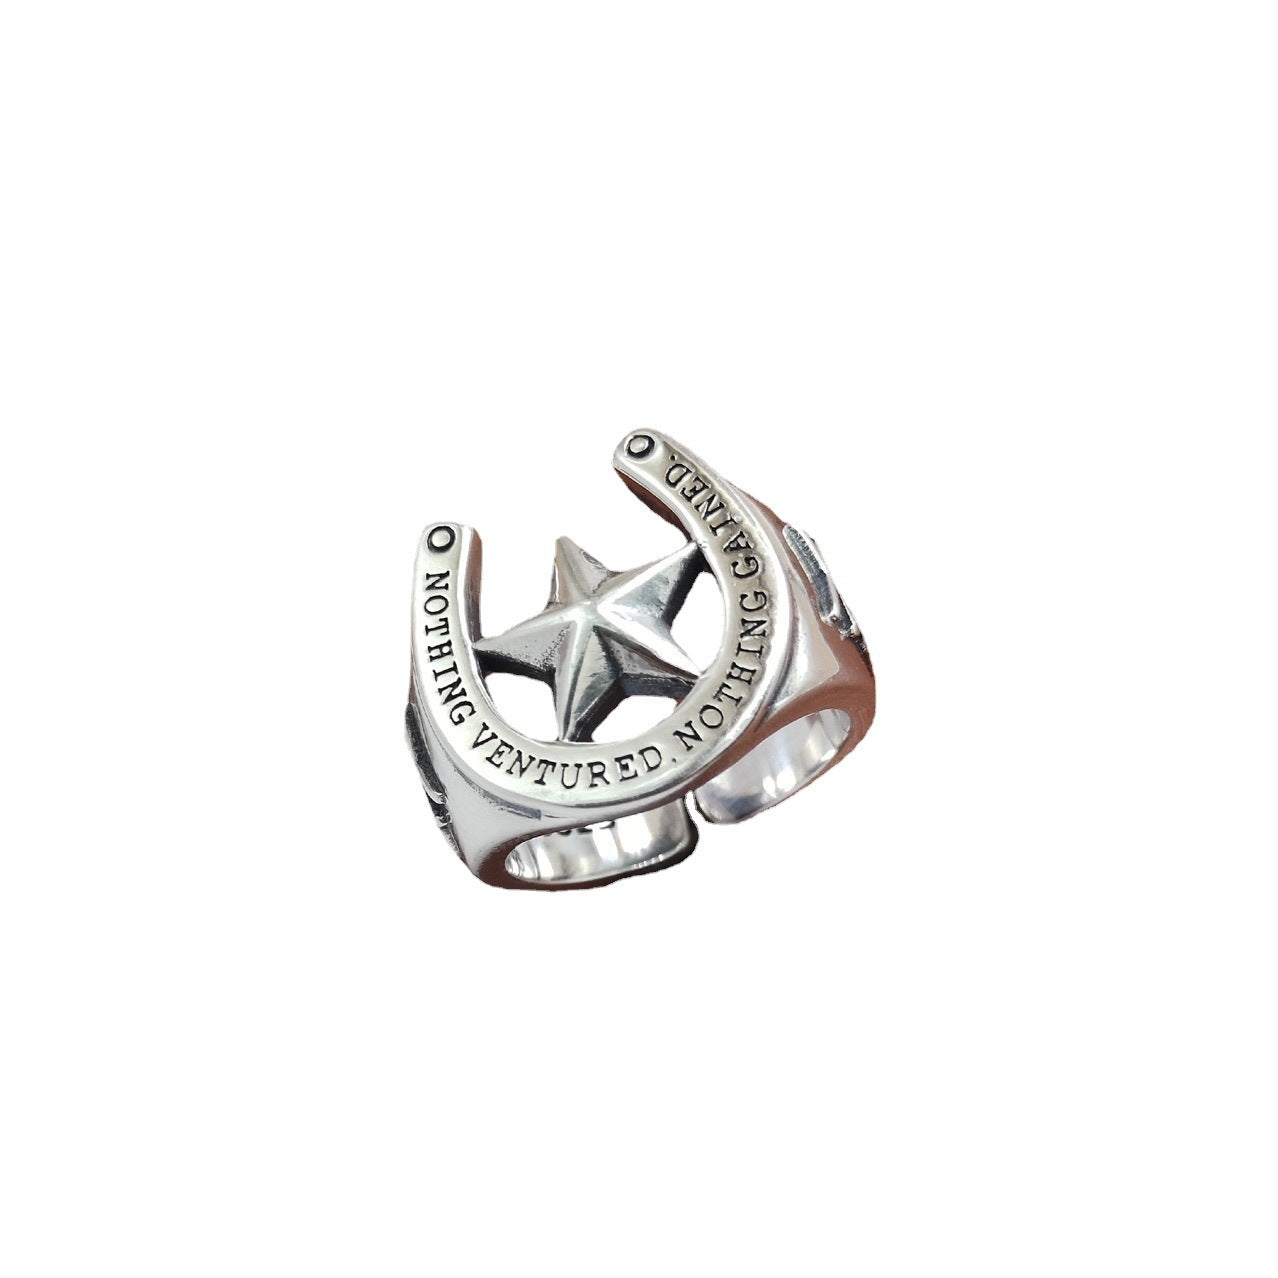 The Men's Silver Star Ring in Close-Up